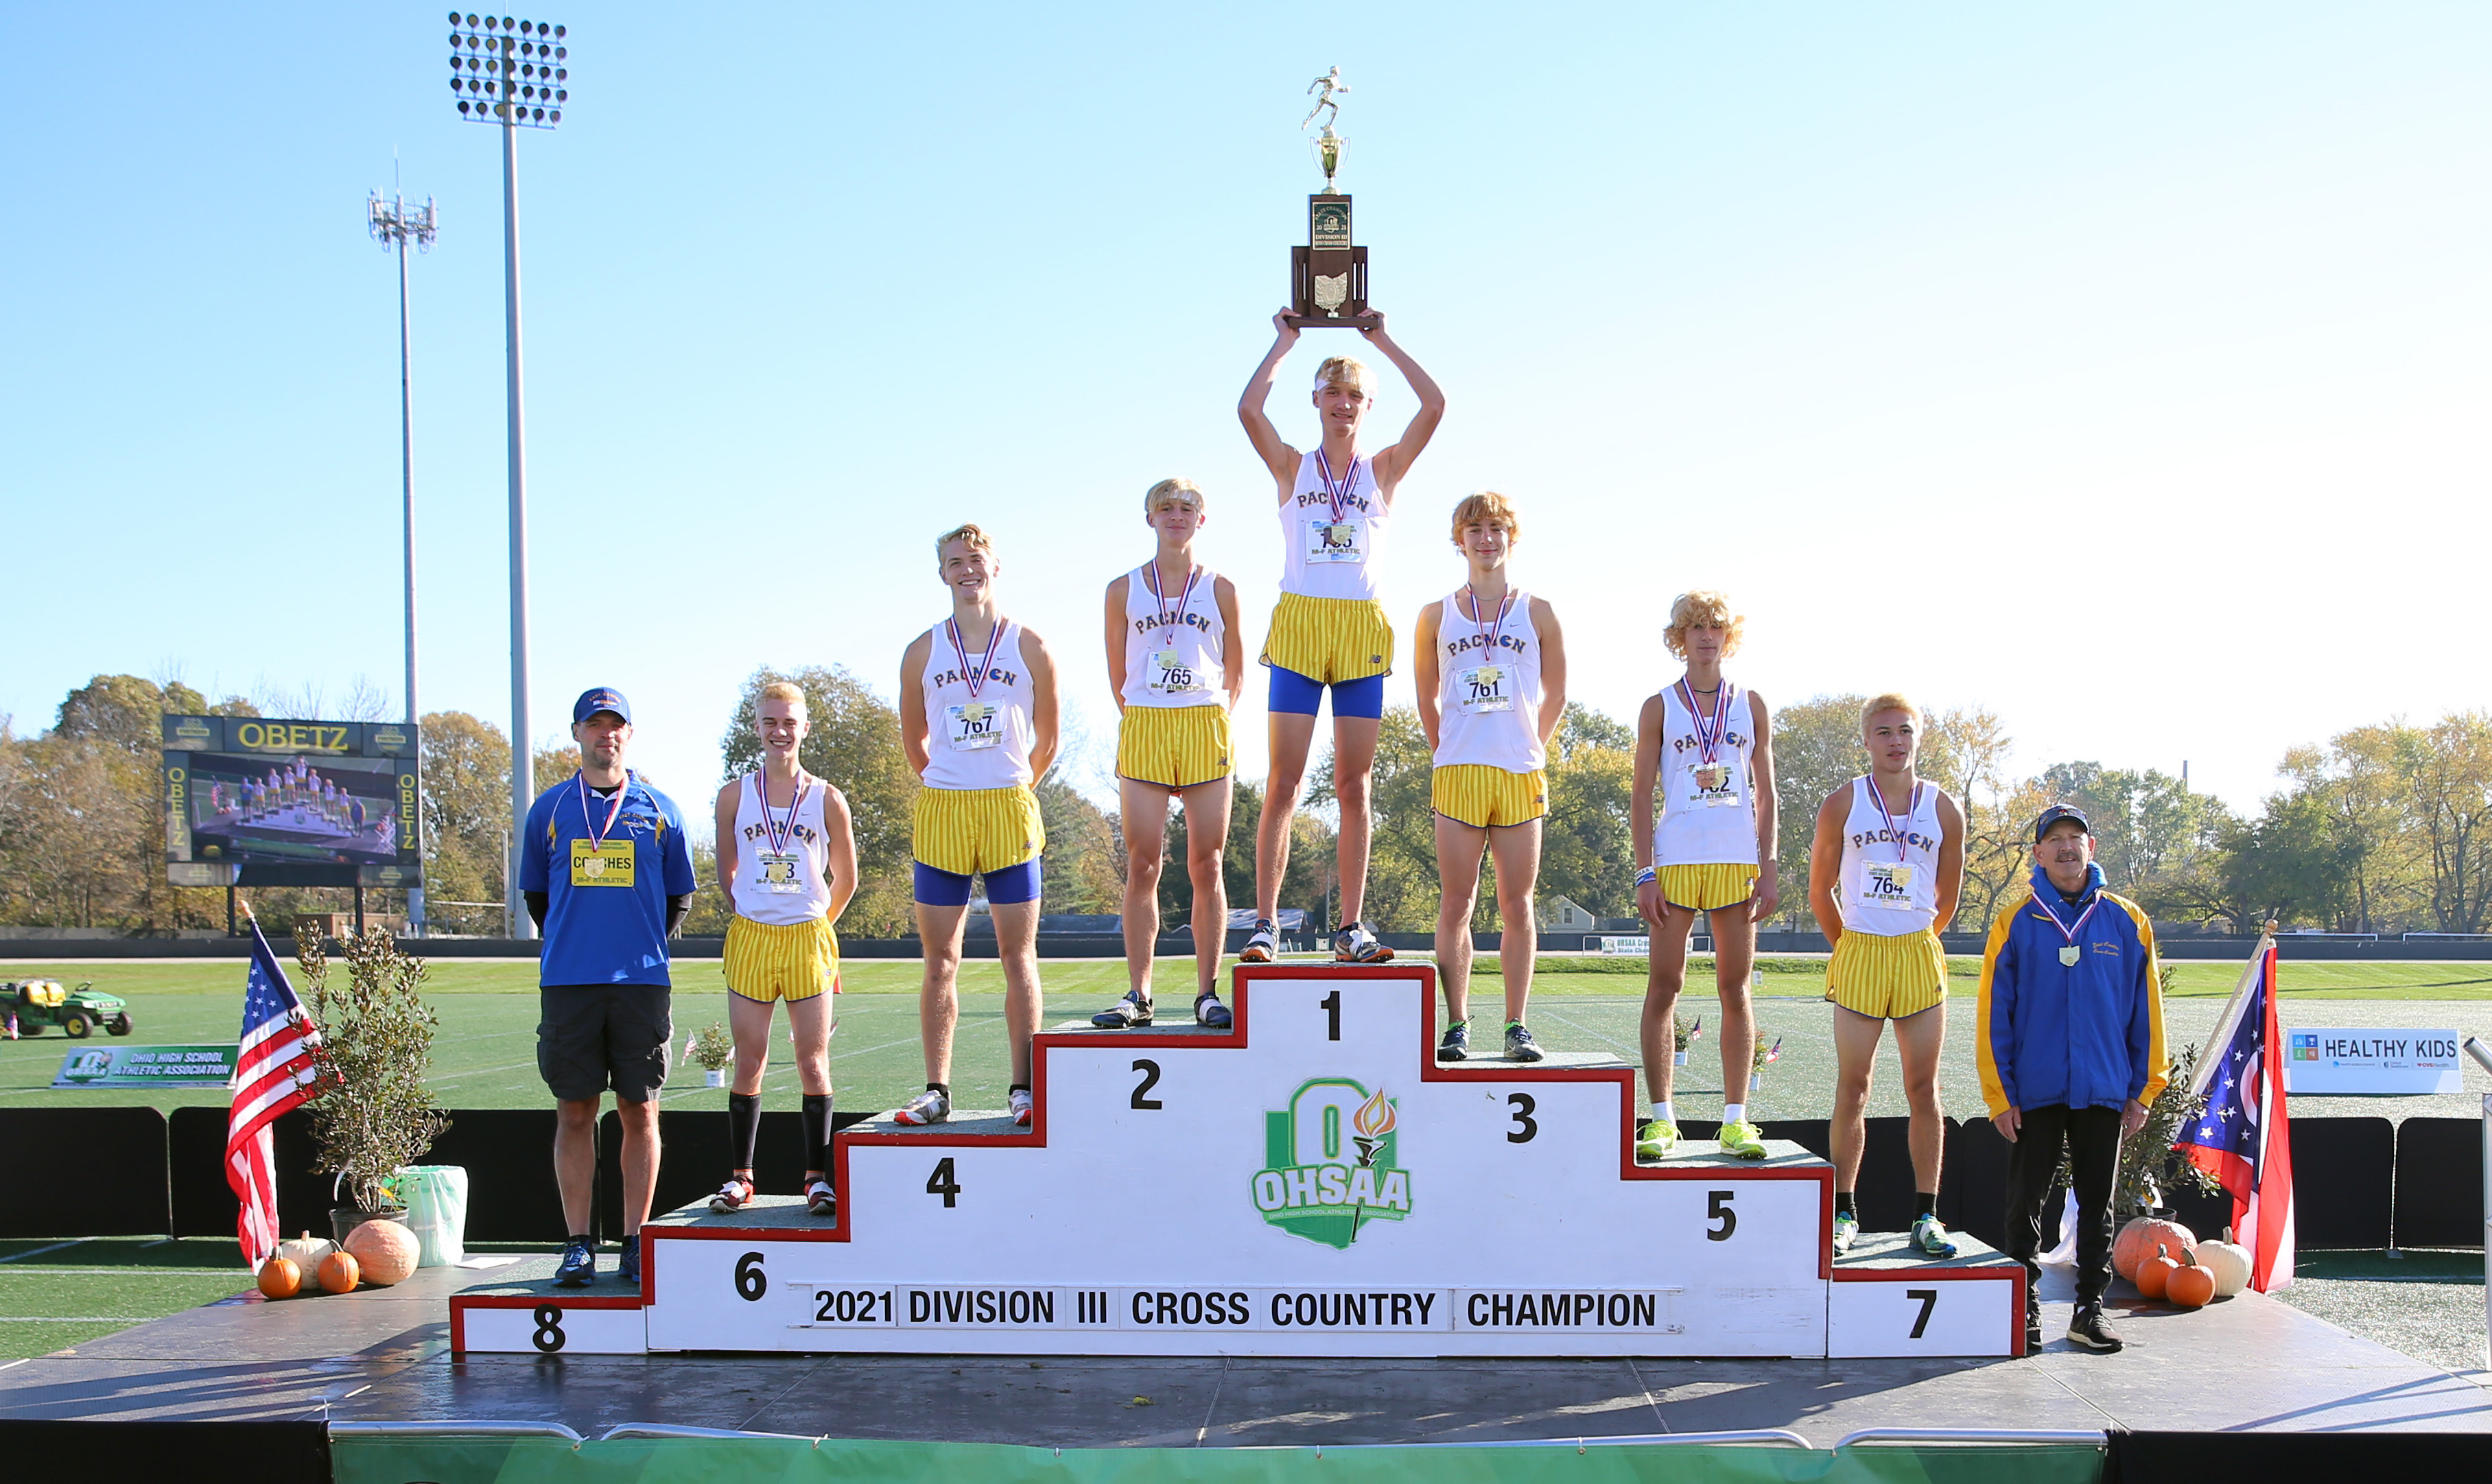 OHSAA division III cross country state championships, November 6, 2021